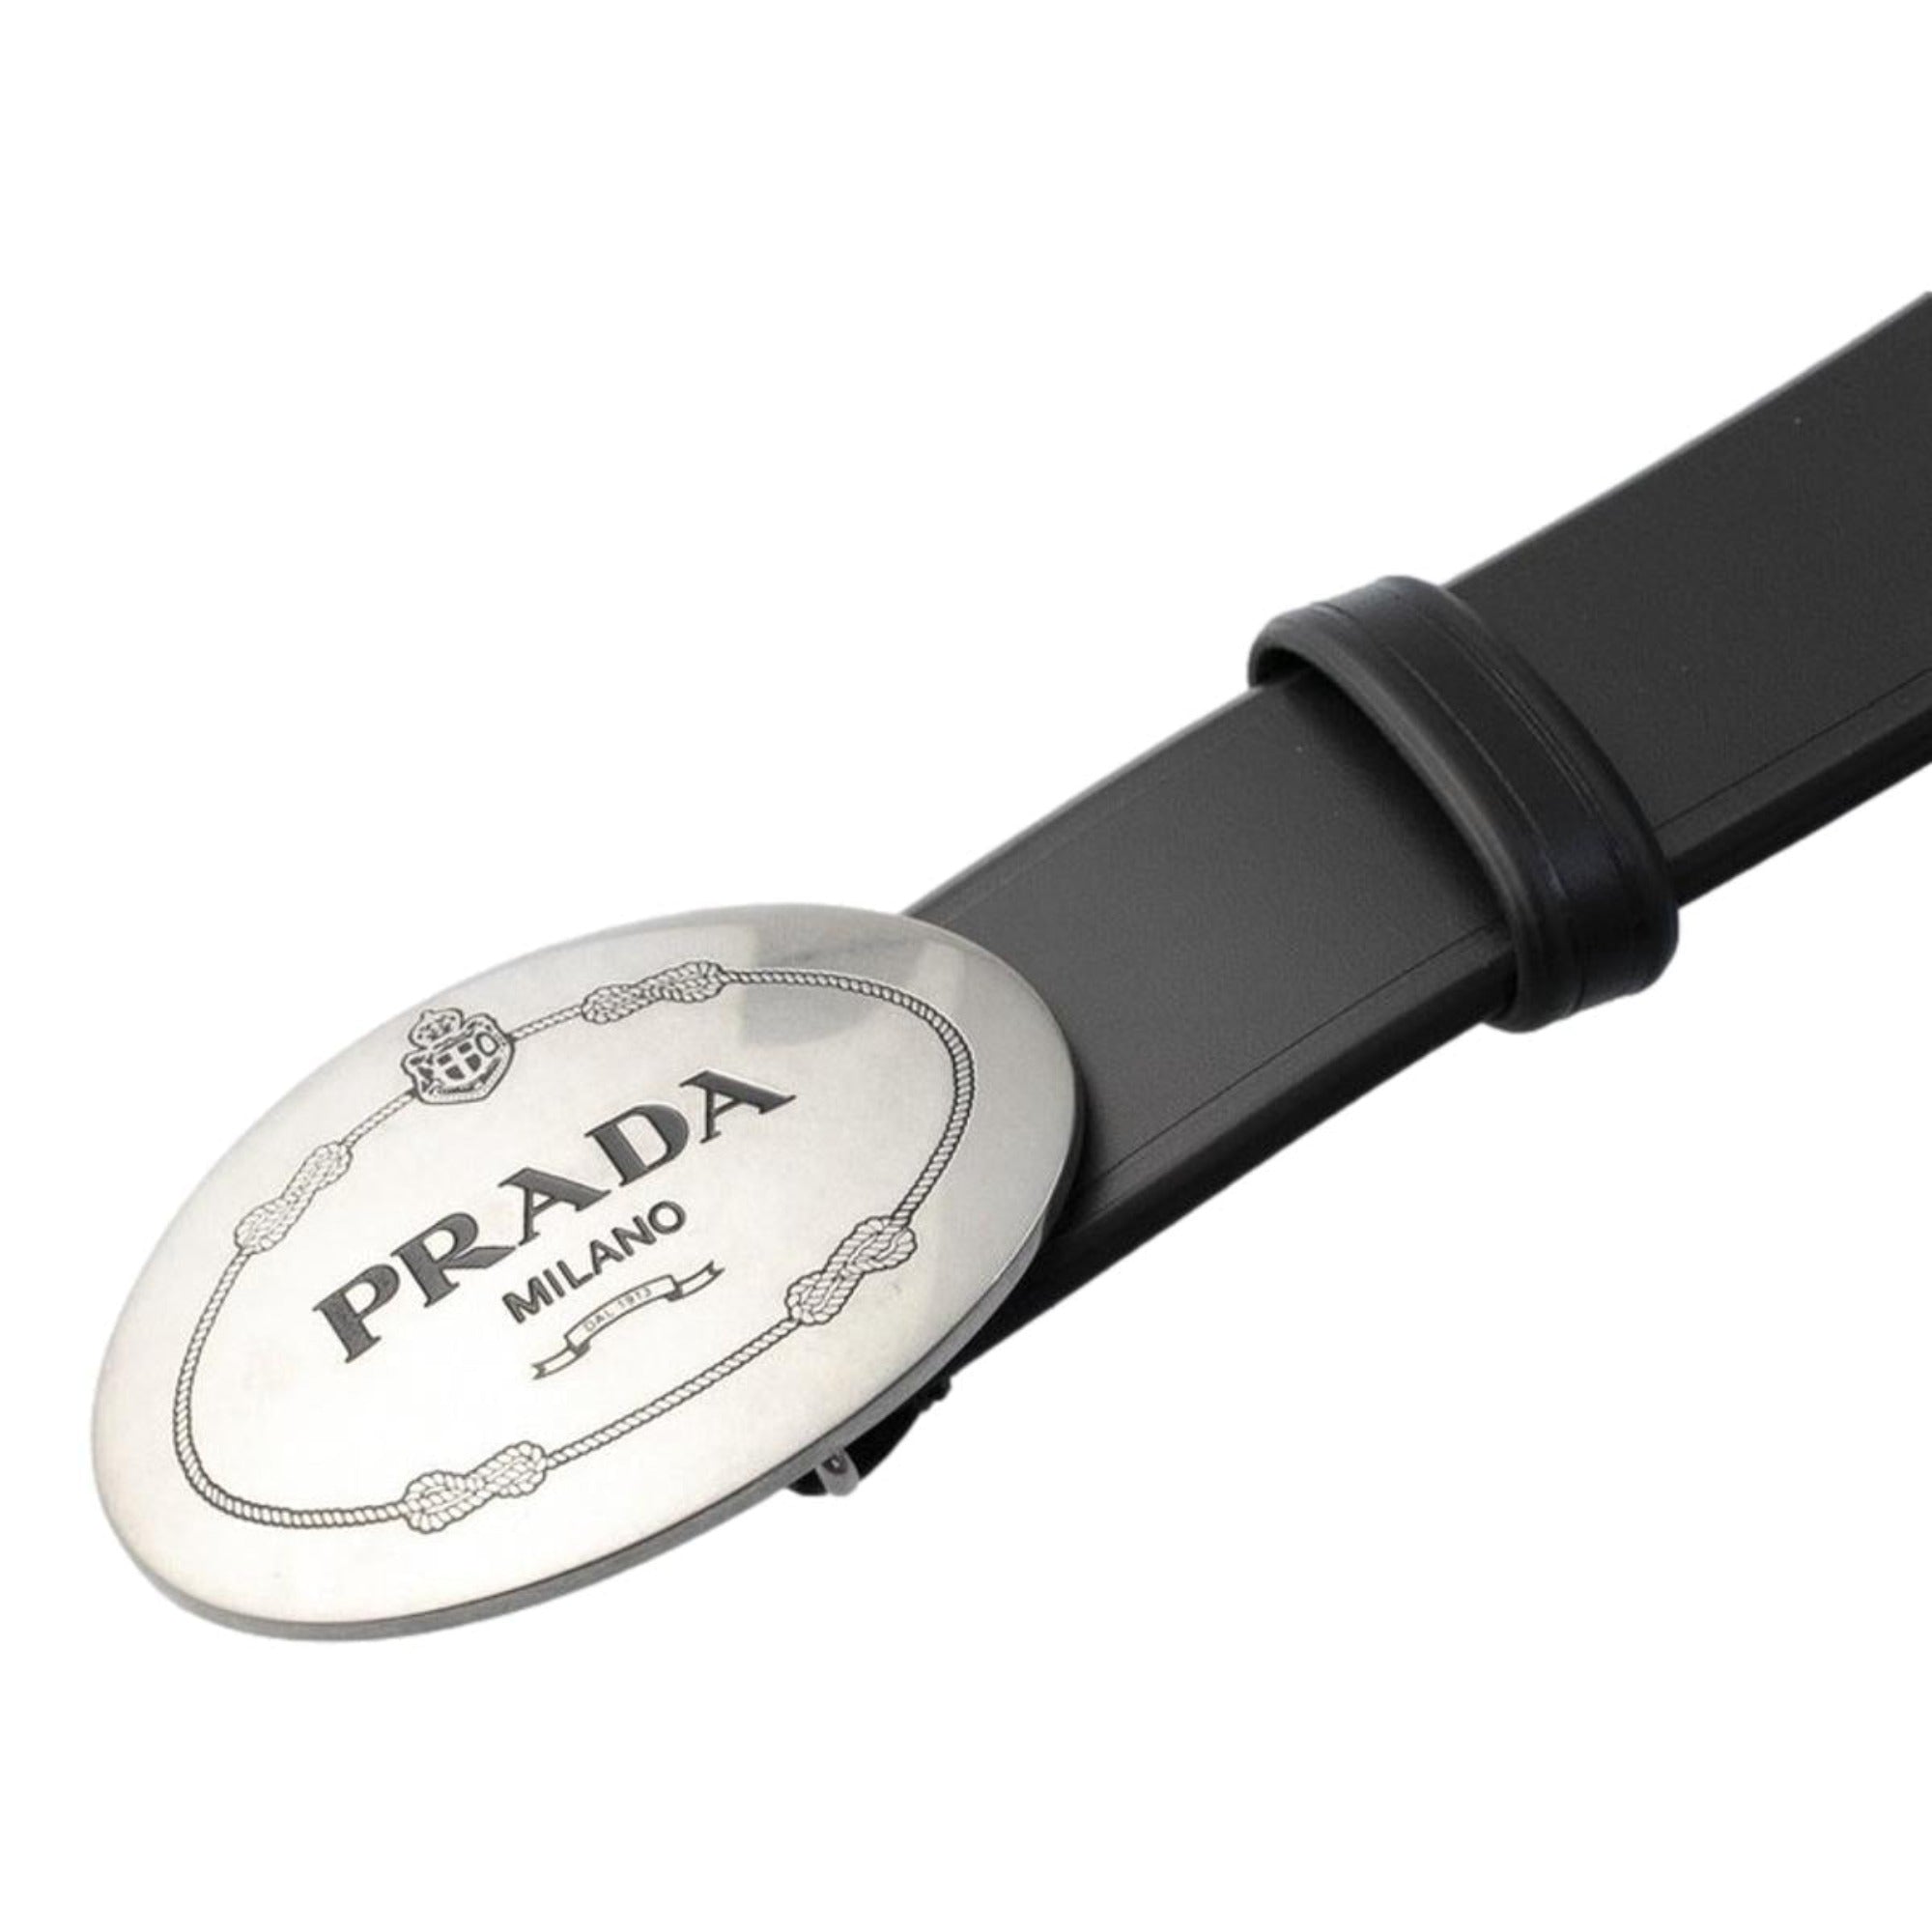 Prada Navy Blue Saffiano Leather Belt Brushed Silver Buckle 95/38 2CM046 at_Queen_Bee_of_Beverly_Hills